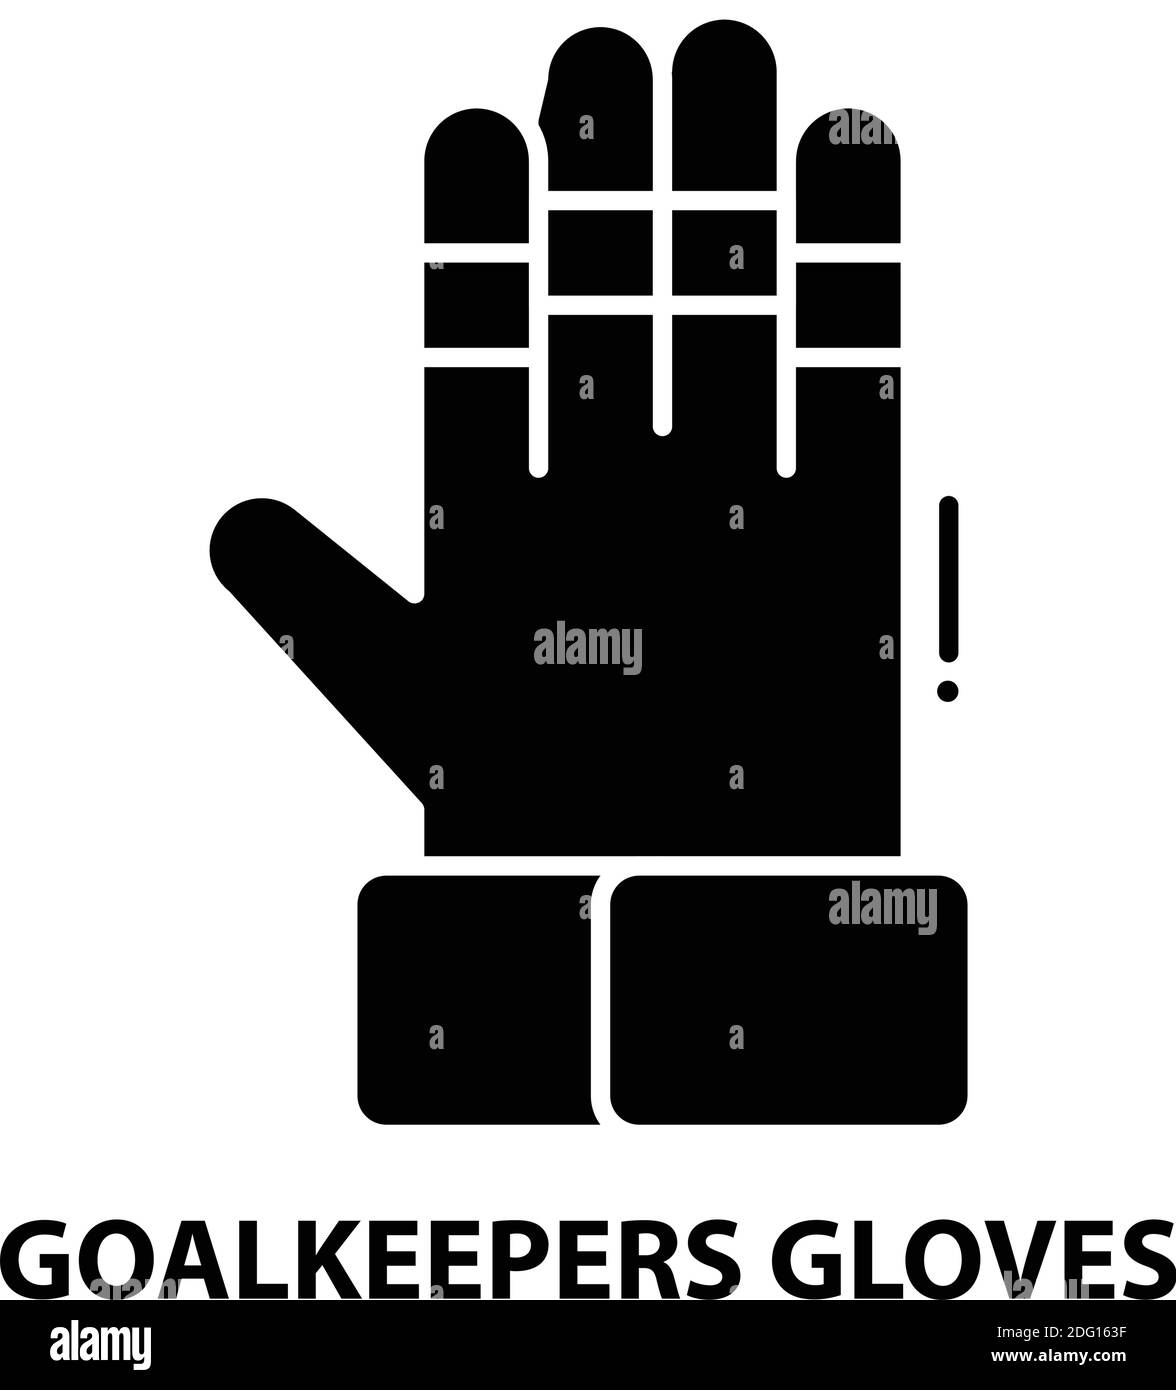 goalkeepers gloves icon, black vector sign with editable strokes, concept illustration Stock Vector